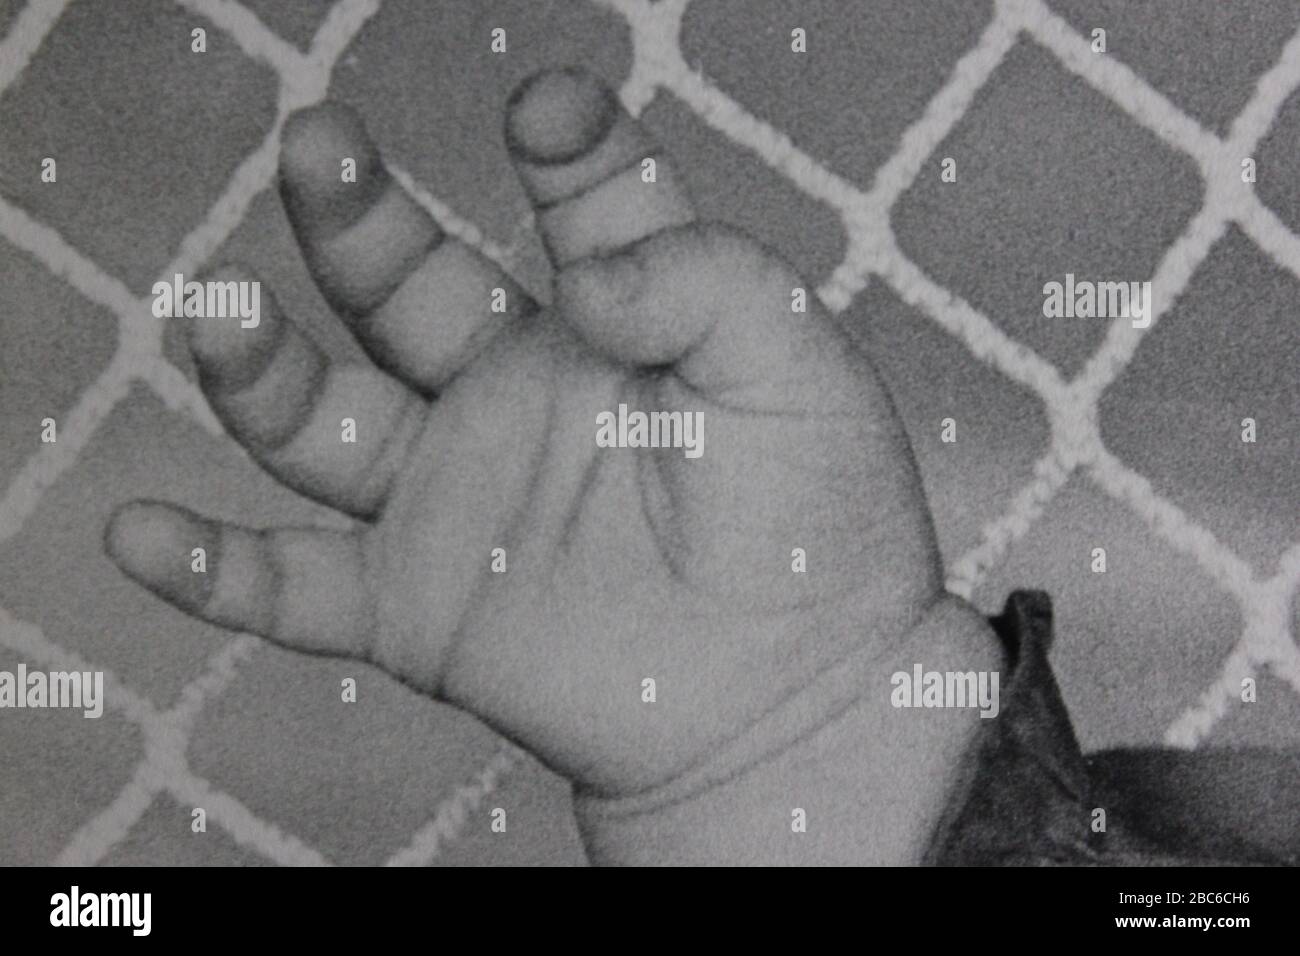 A baby hand in front of a mesh guard. Stock Photo